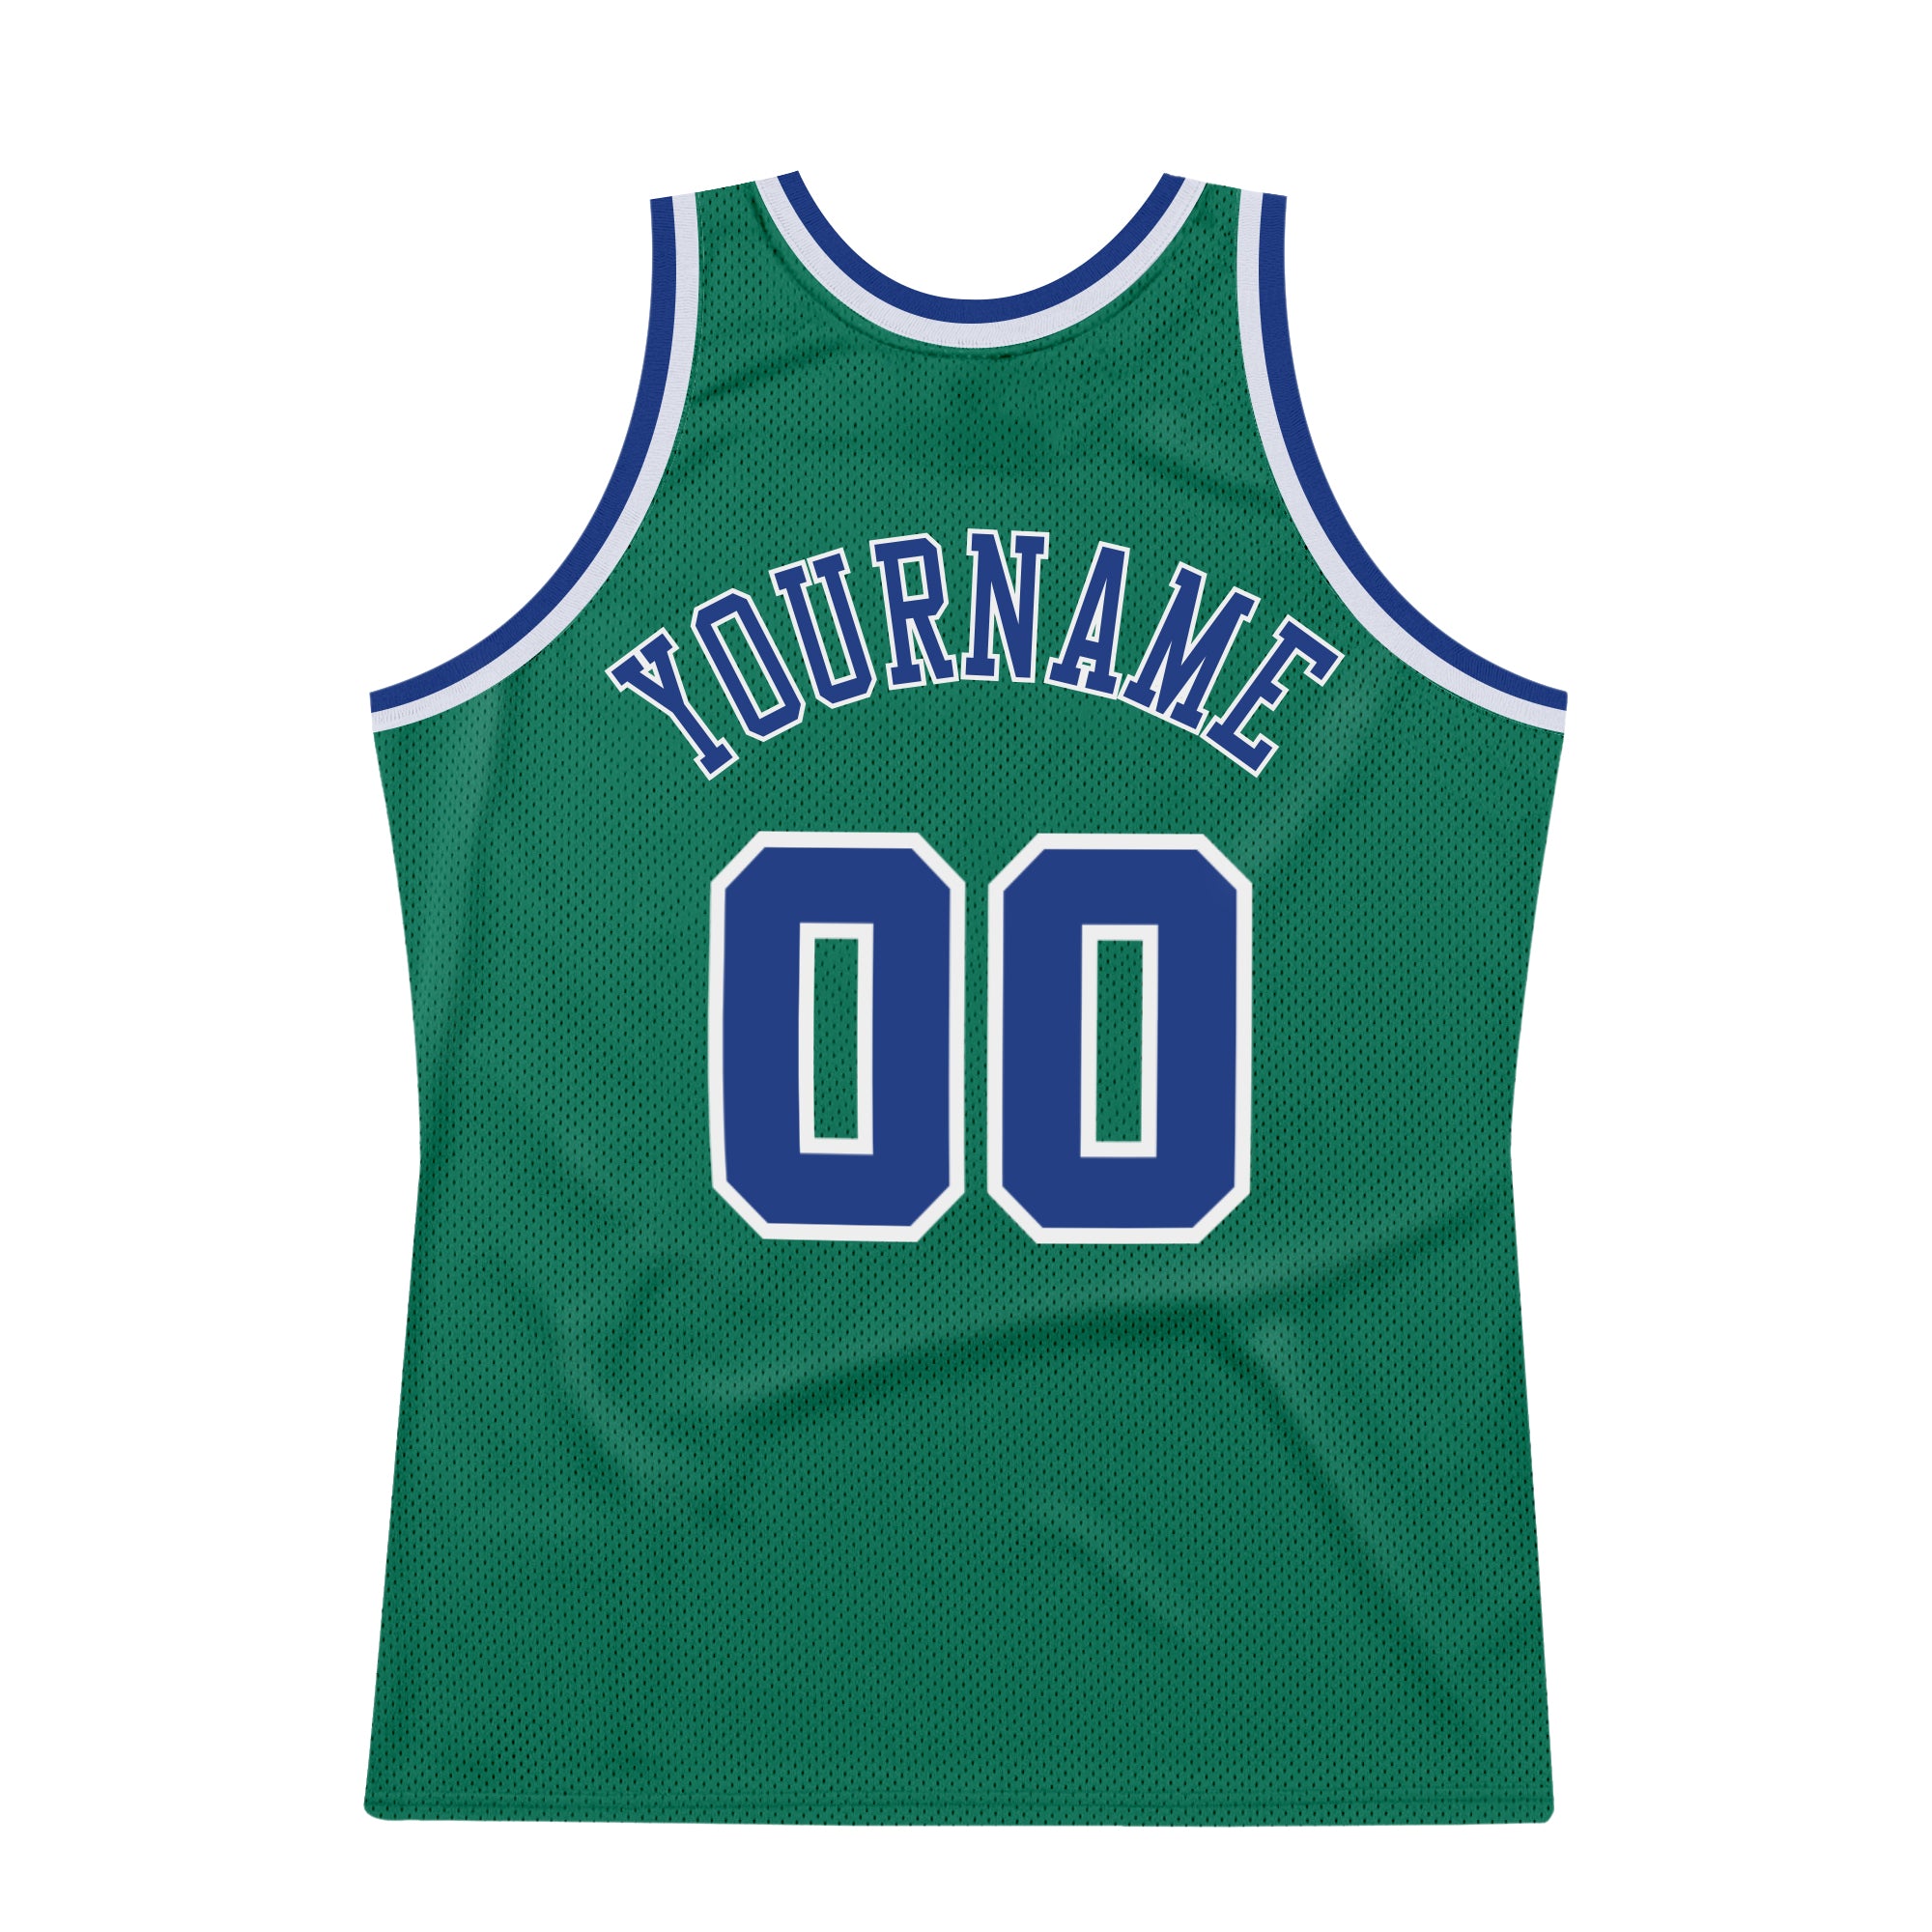 Custom Kelly Green Royal-White Authentic Throwback Basketball Jersey